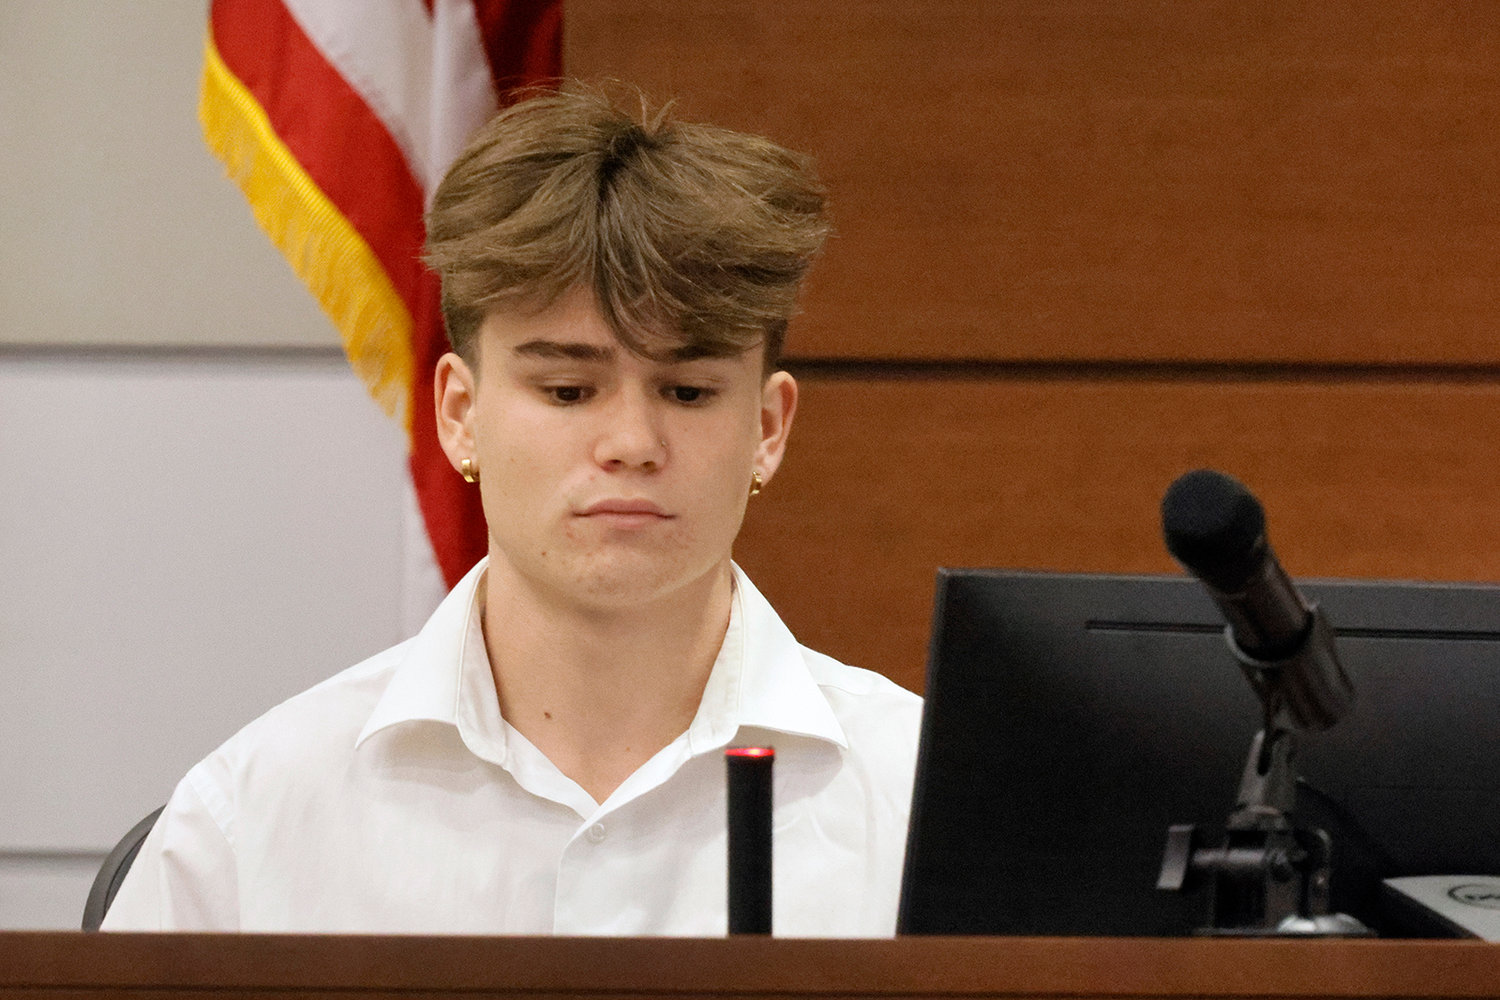 Former Marjory Stoneman Douglas student Alexander Dworet describes the gunshot injuries he sustained to the back of his head. He was testifying during the Marjory Stoneman Douglas High School shooter Nikolas Cruz penalty phase of his trial at the Broward County Courthouse in Fort Lauderdale on Wednesday, July 19, 2022. His brother, Nicholas Dworet was killed in the rampage. Cruz previously plead guilty to all 17 counts of premeditated murder and 17 counts of attempted murder in the 2018 shootings. (Mike Stocker/Sun Sentinel/TNS)